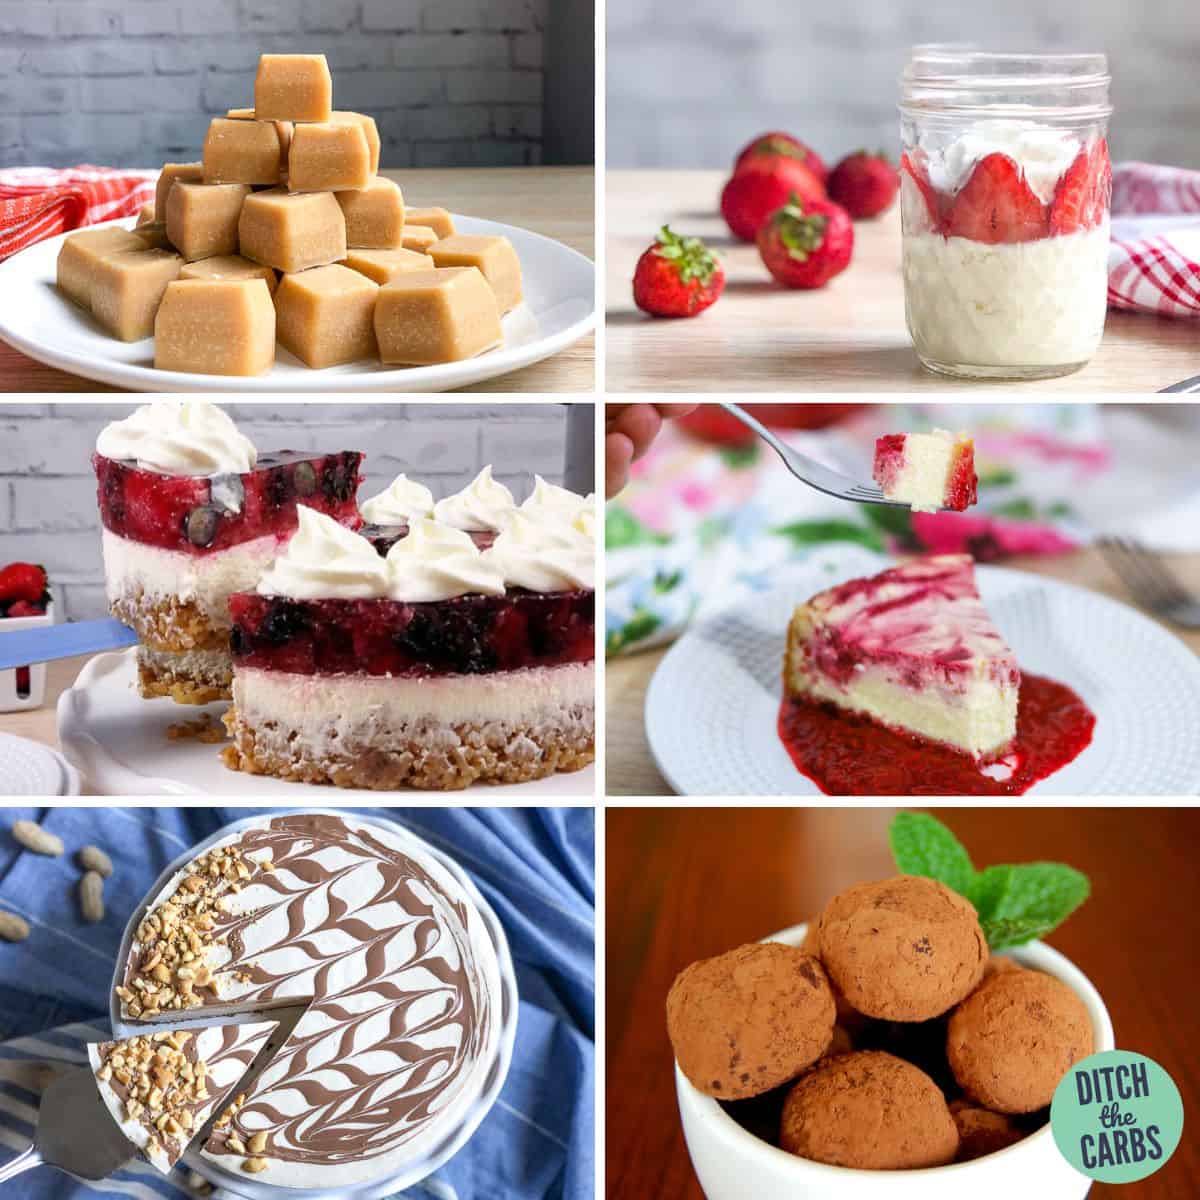 collage of keto desserts made with cream cheese